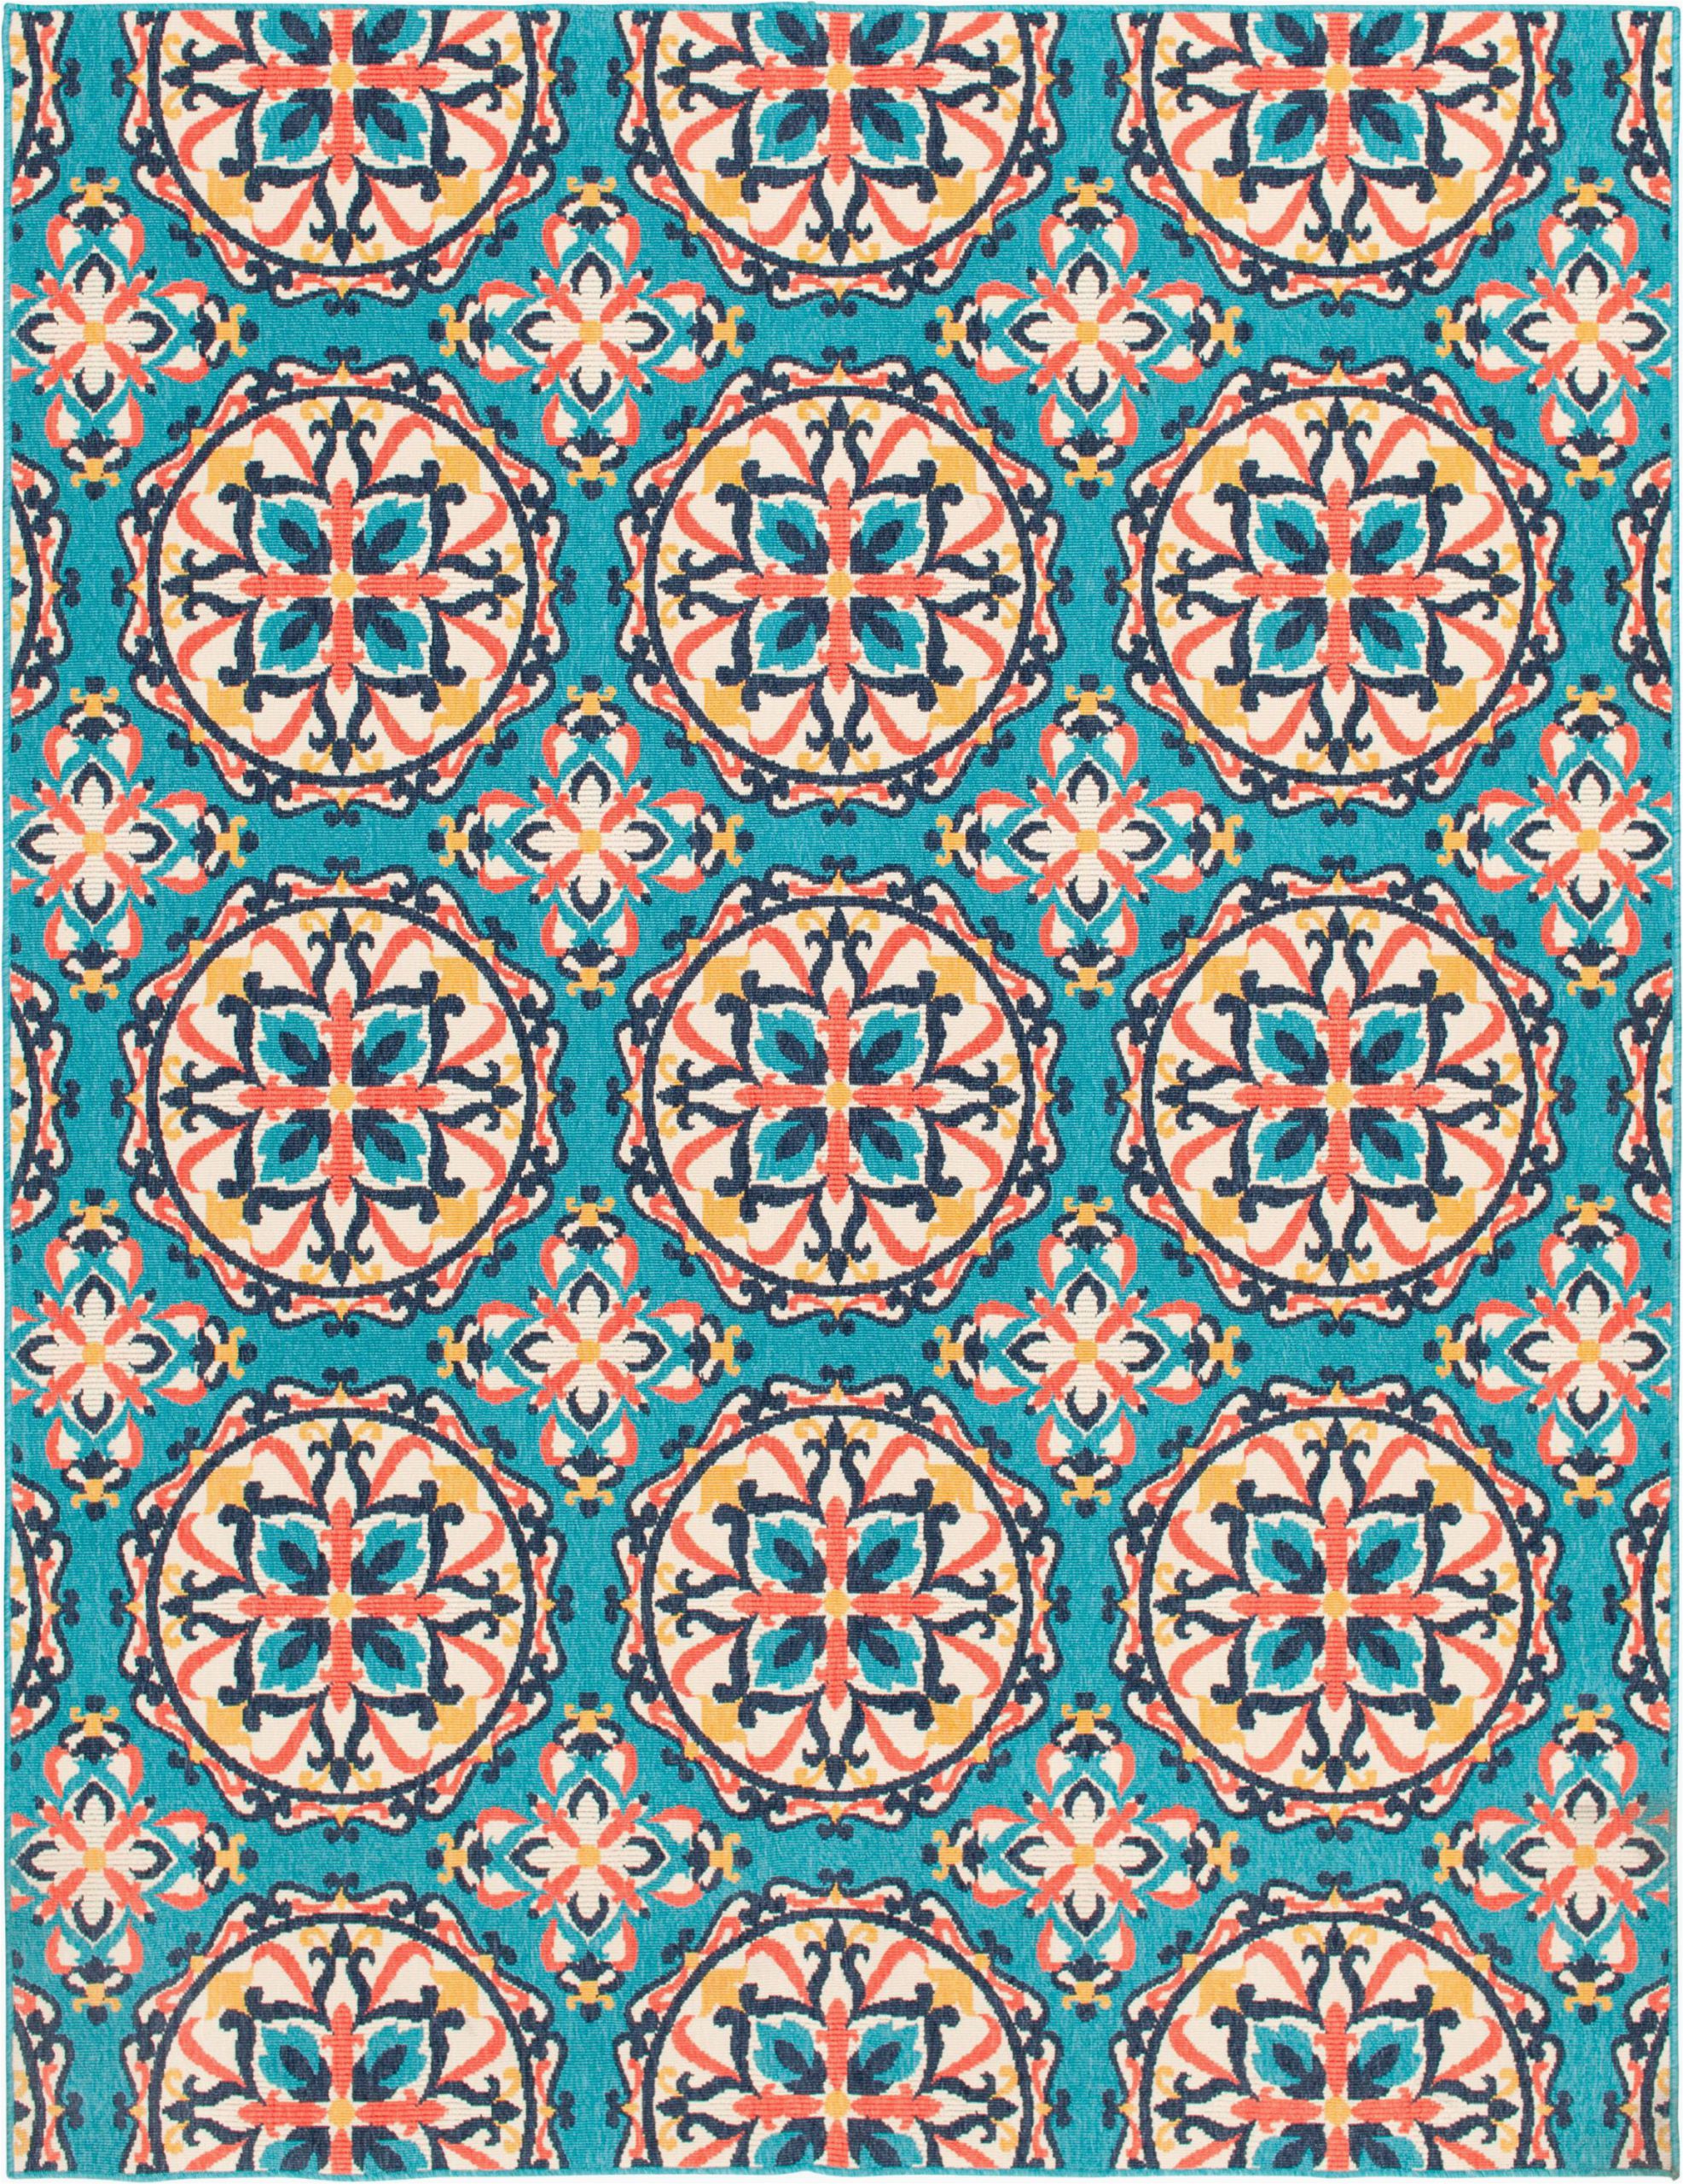 Better Homes and Gardens area Rugs at Walmart Better Homes & Gardens 8 X10 Turquoise Medallion Outdoor area Rug Walmart